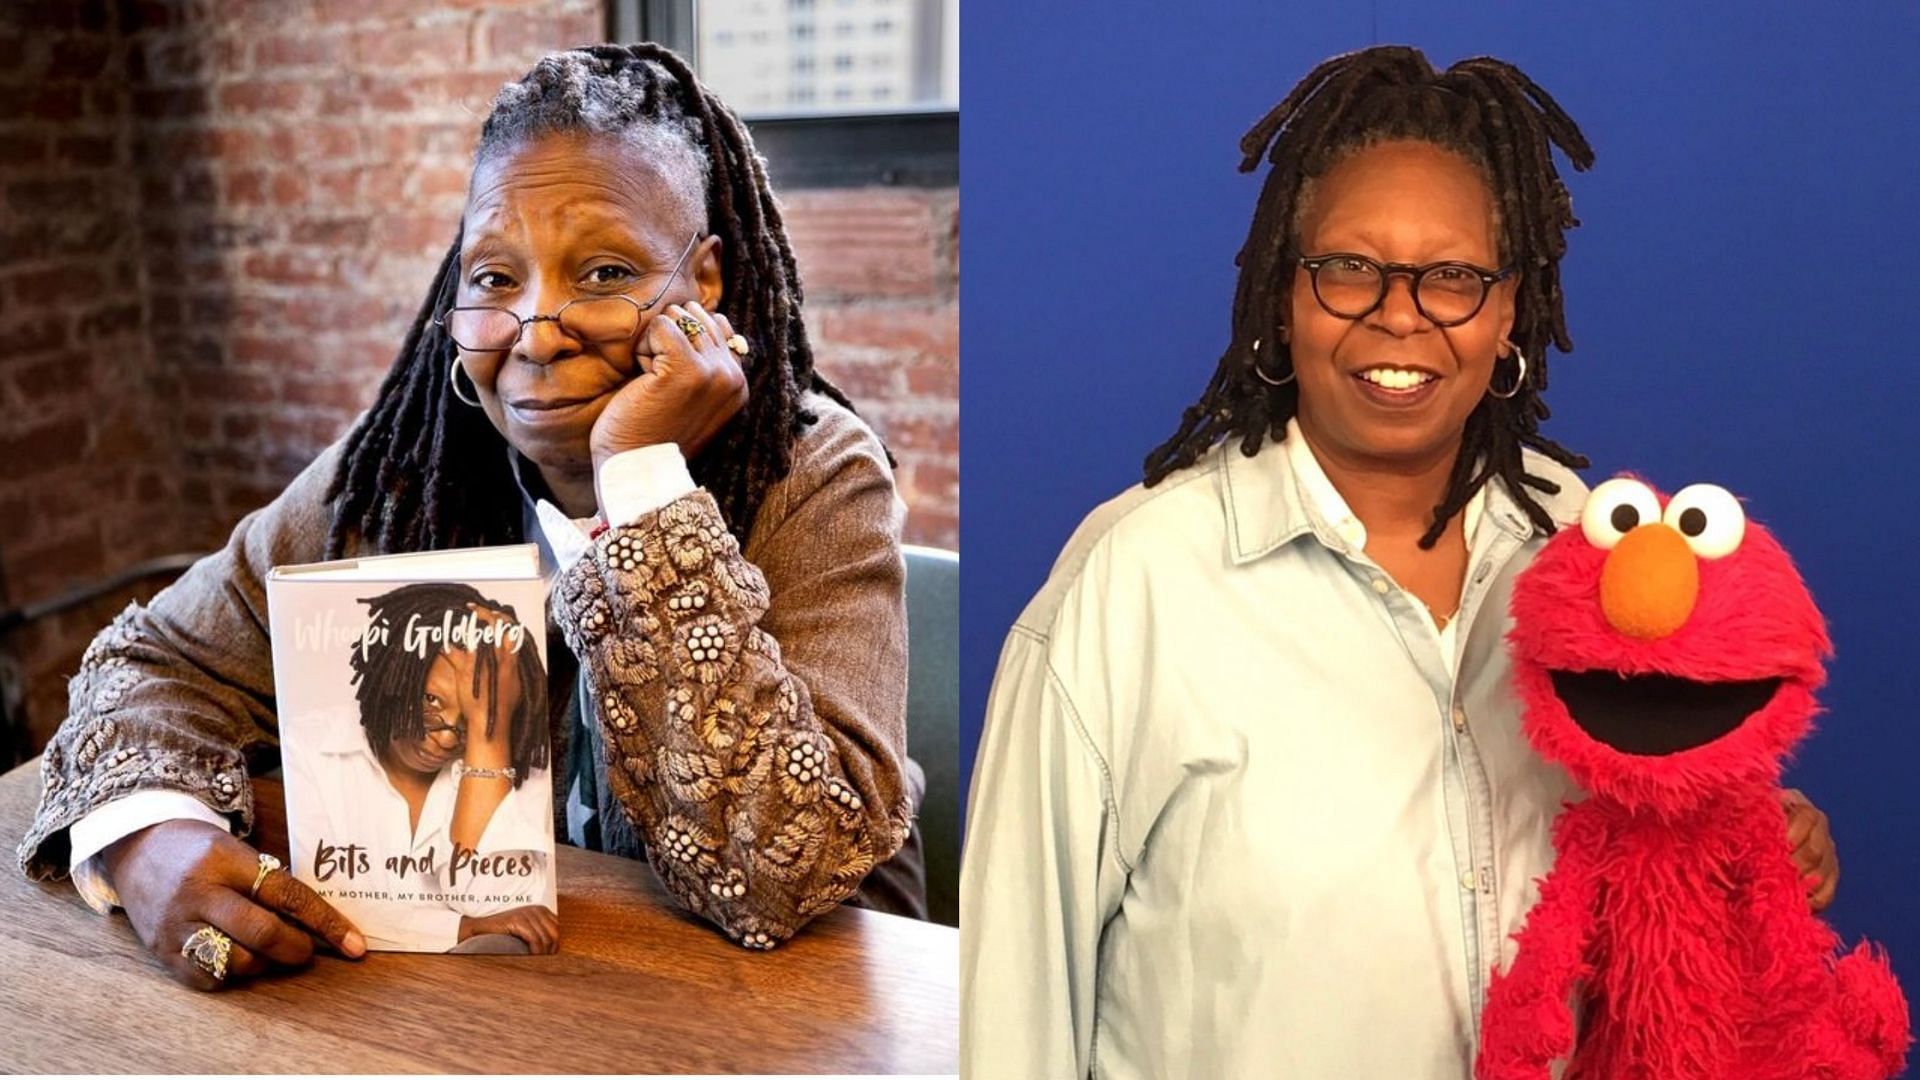 Whoopi Goldberg recently opened up about her childhood traumas in her new book (Image via Instagram / @whoopigoldberg)